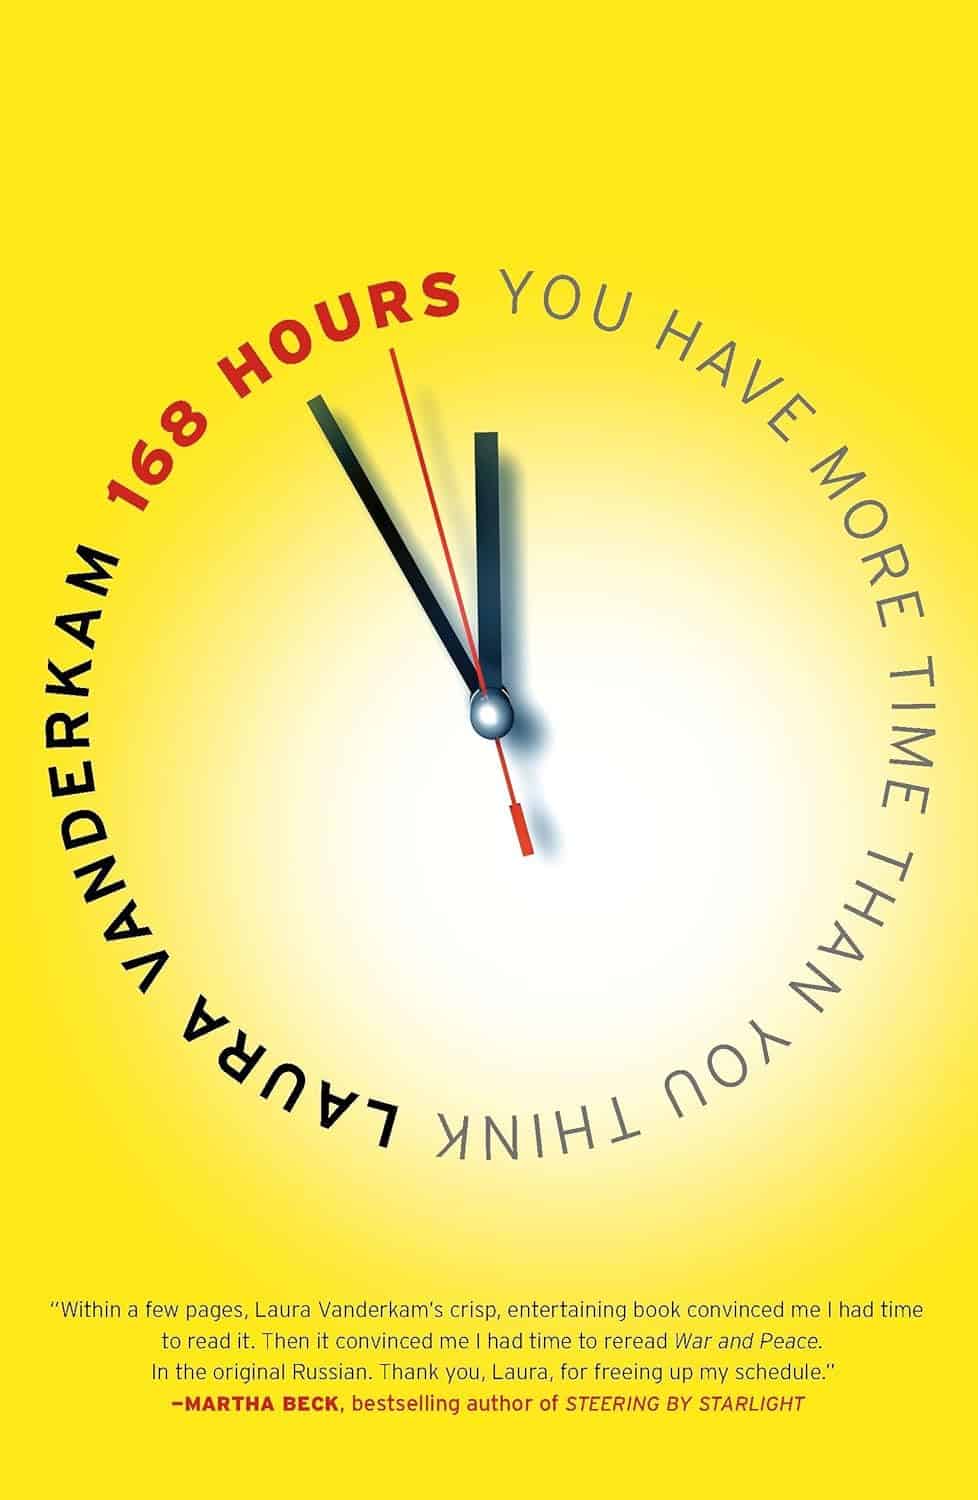 168 Hours You Have More Time Than You Think by Laura Vanderkam